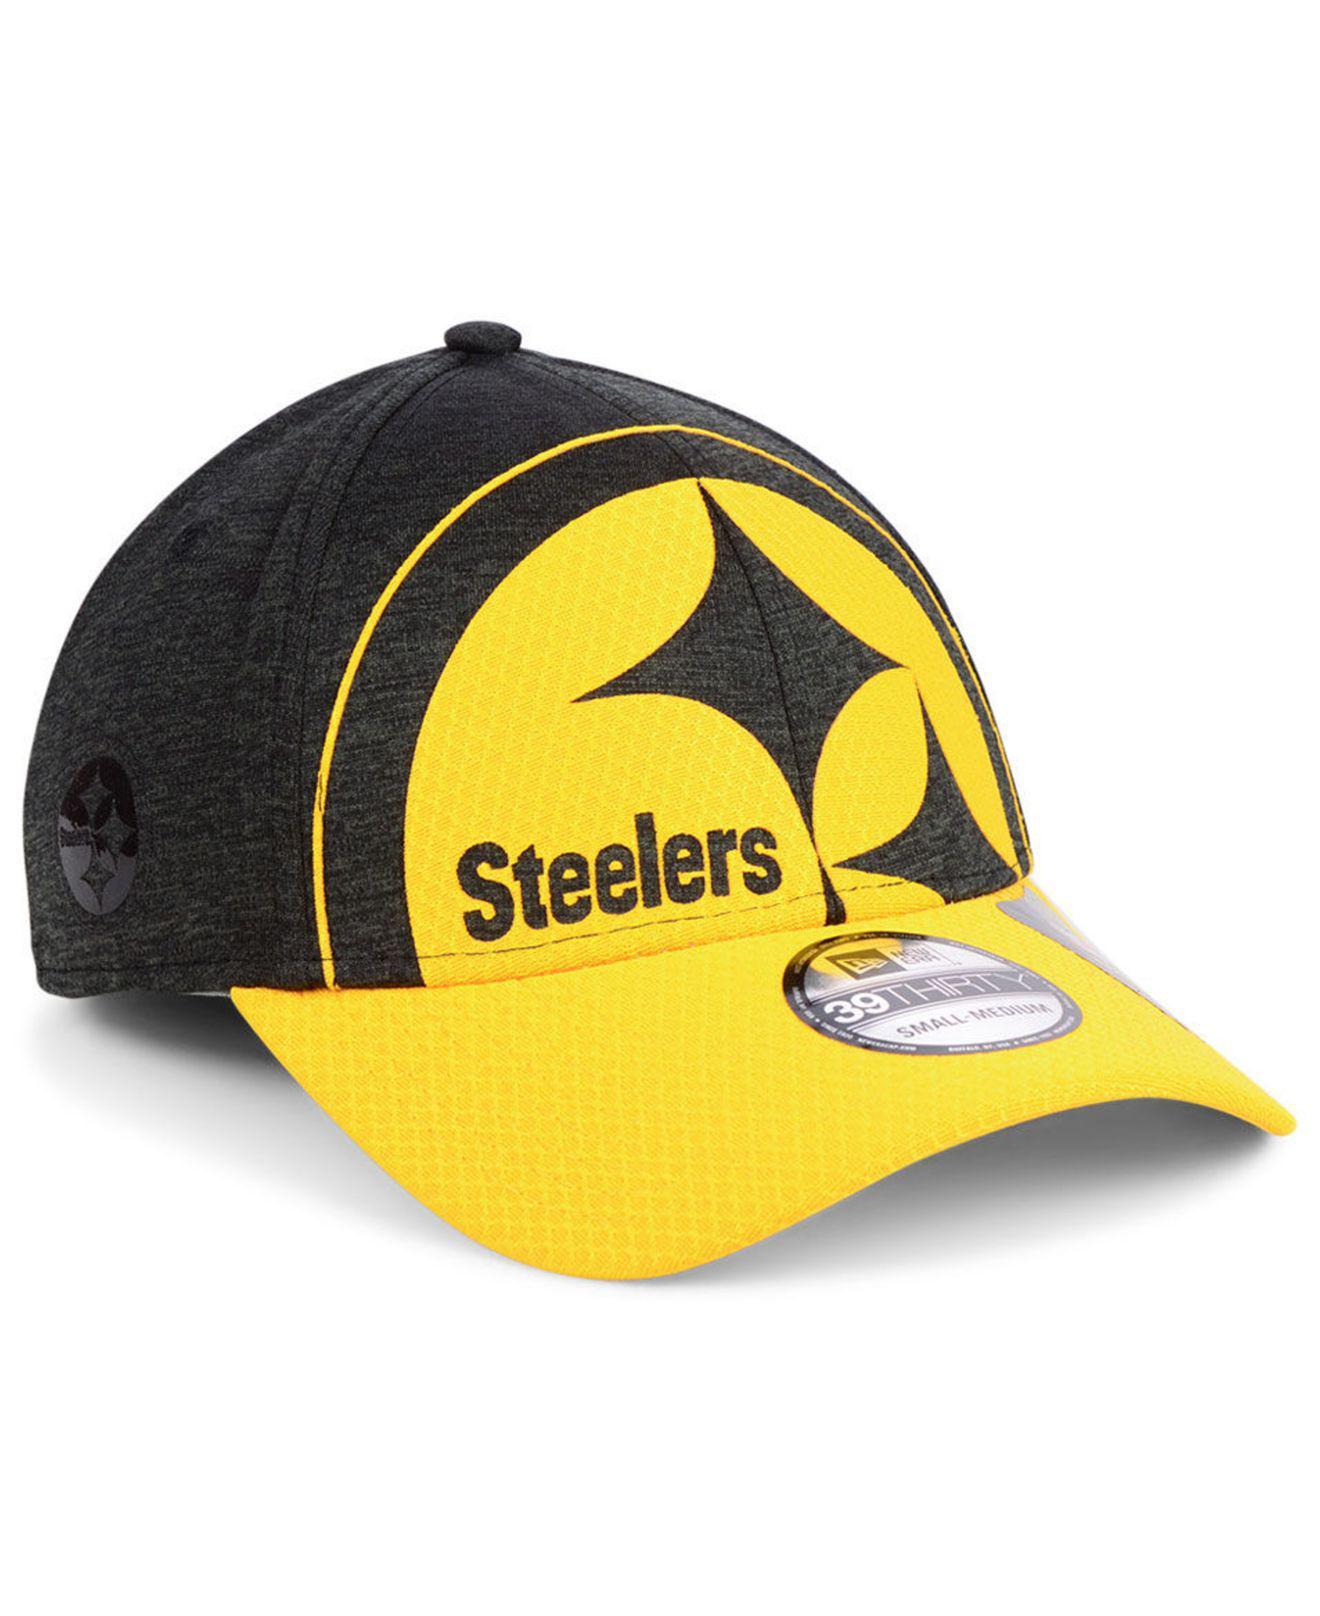 Black and Yellow Steelers Logo - Lyst - KTZ Pittsburgh Steelers Oversized Laser Cut Logo 39thirty Cap ...